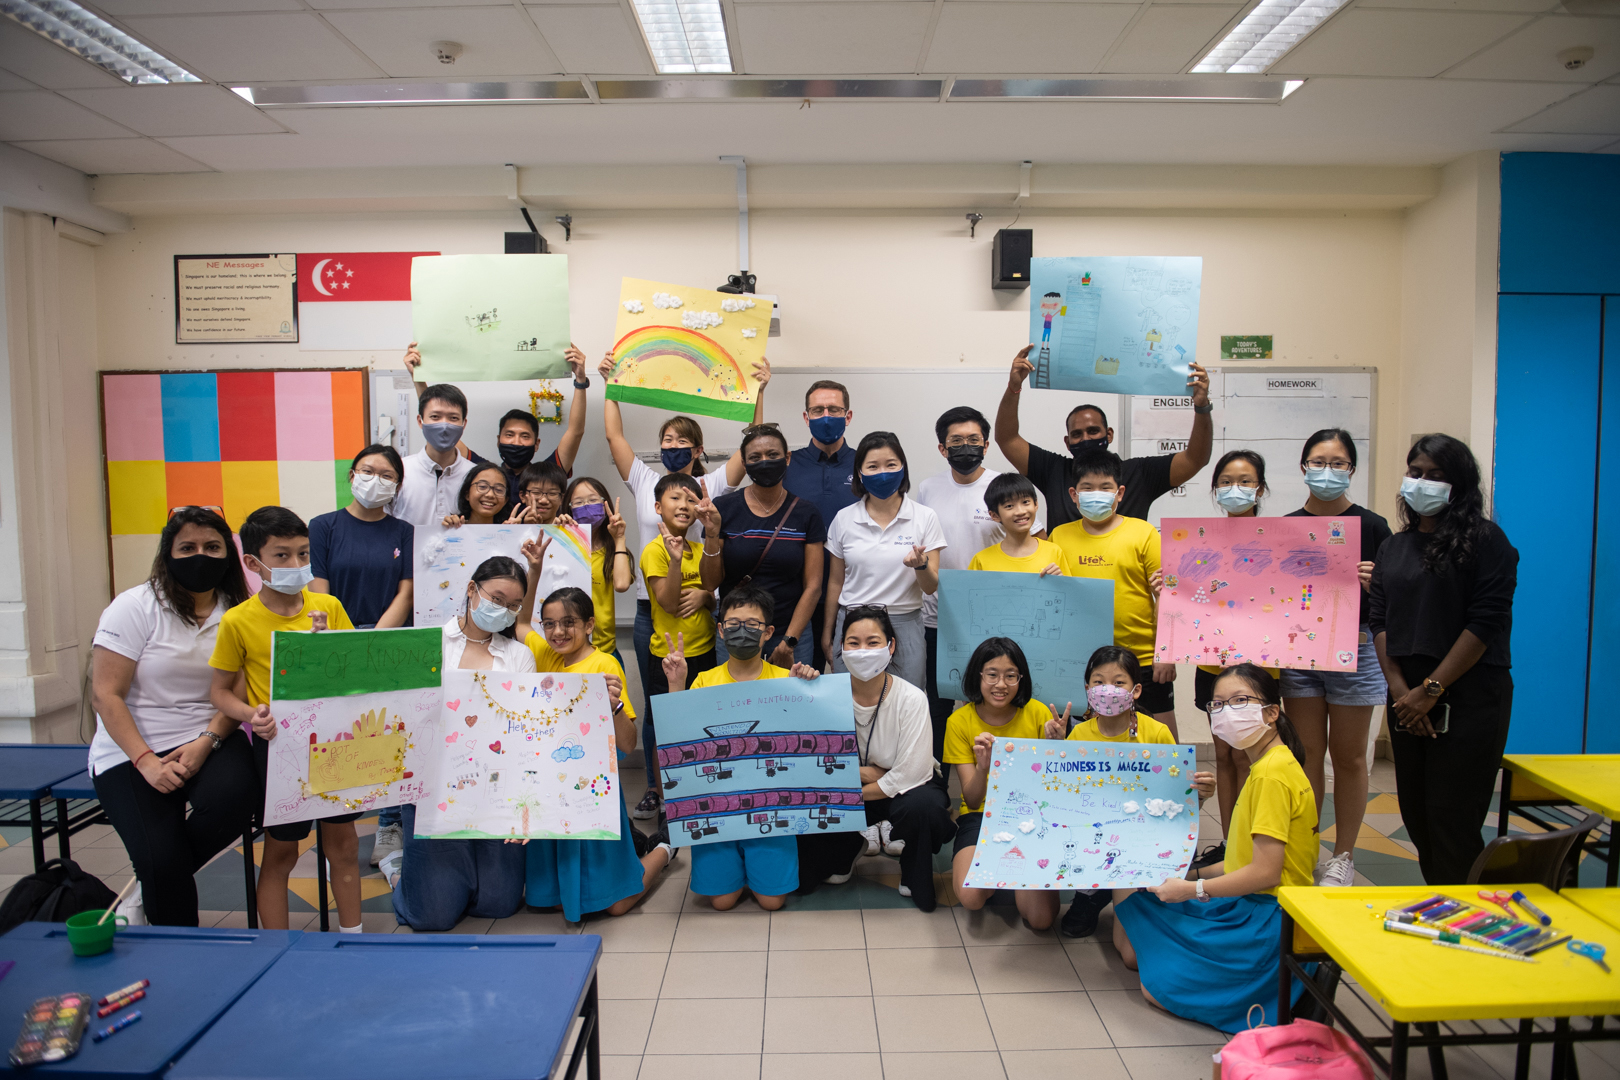 This picture show a project at a school from the social week of BMW Group Asia.